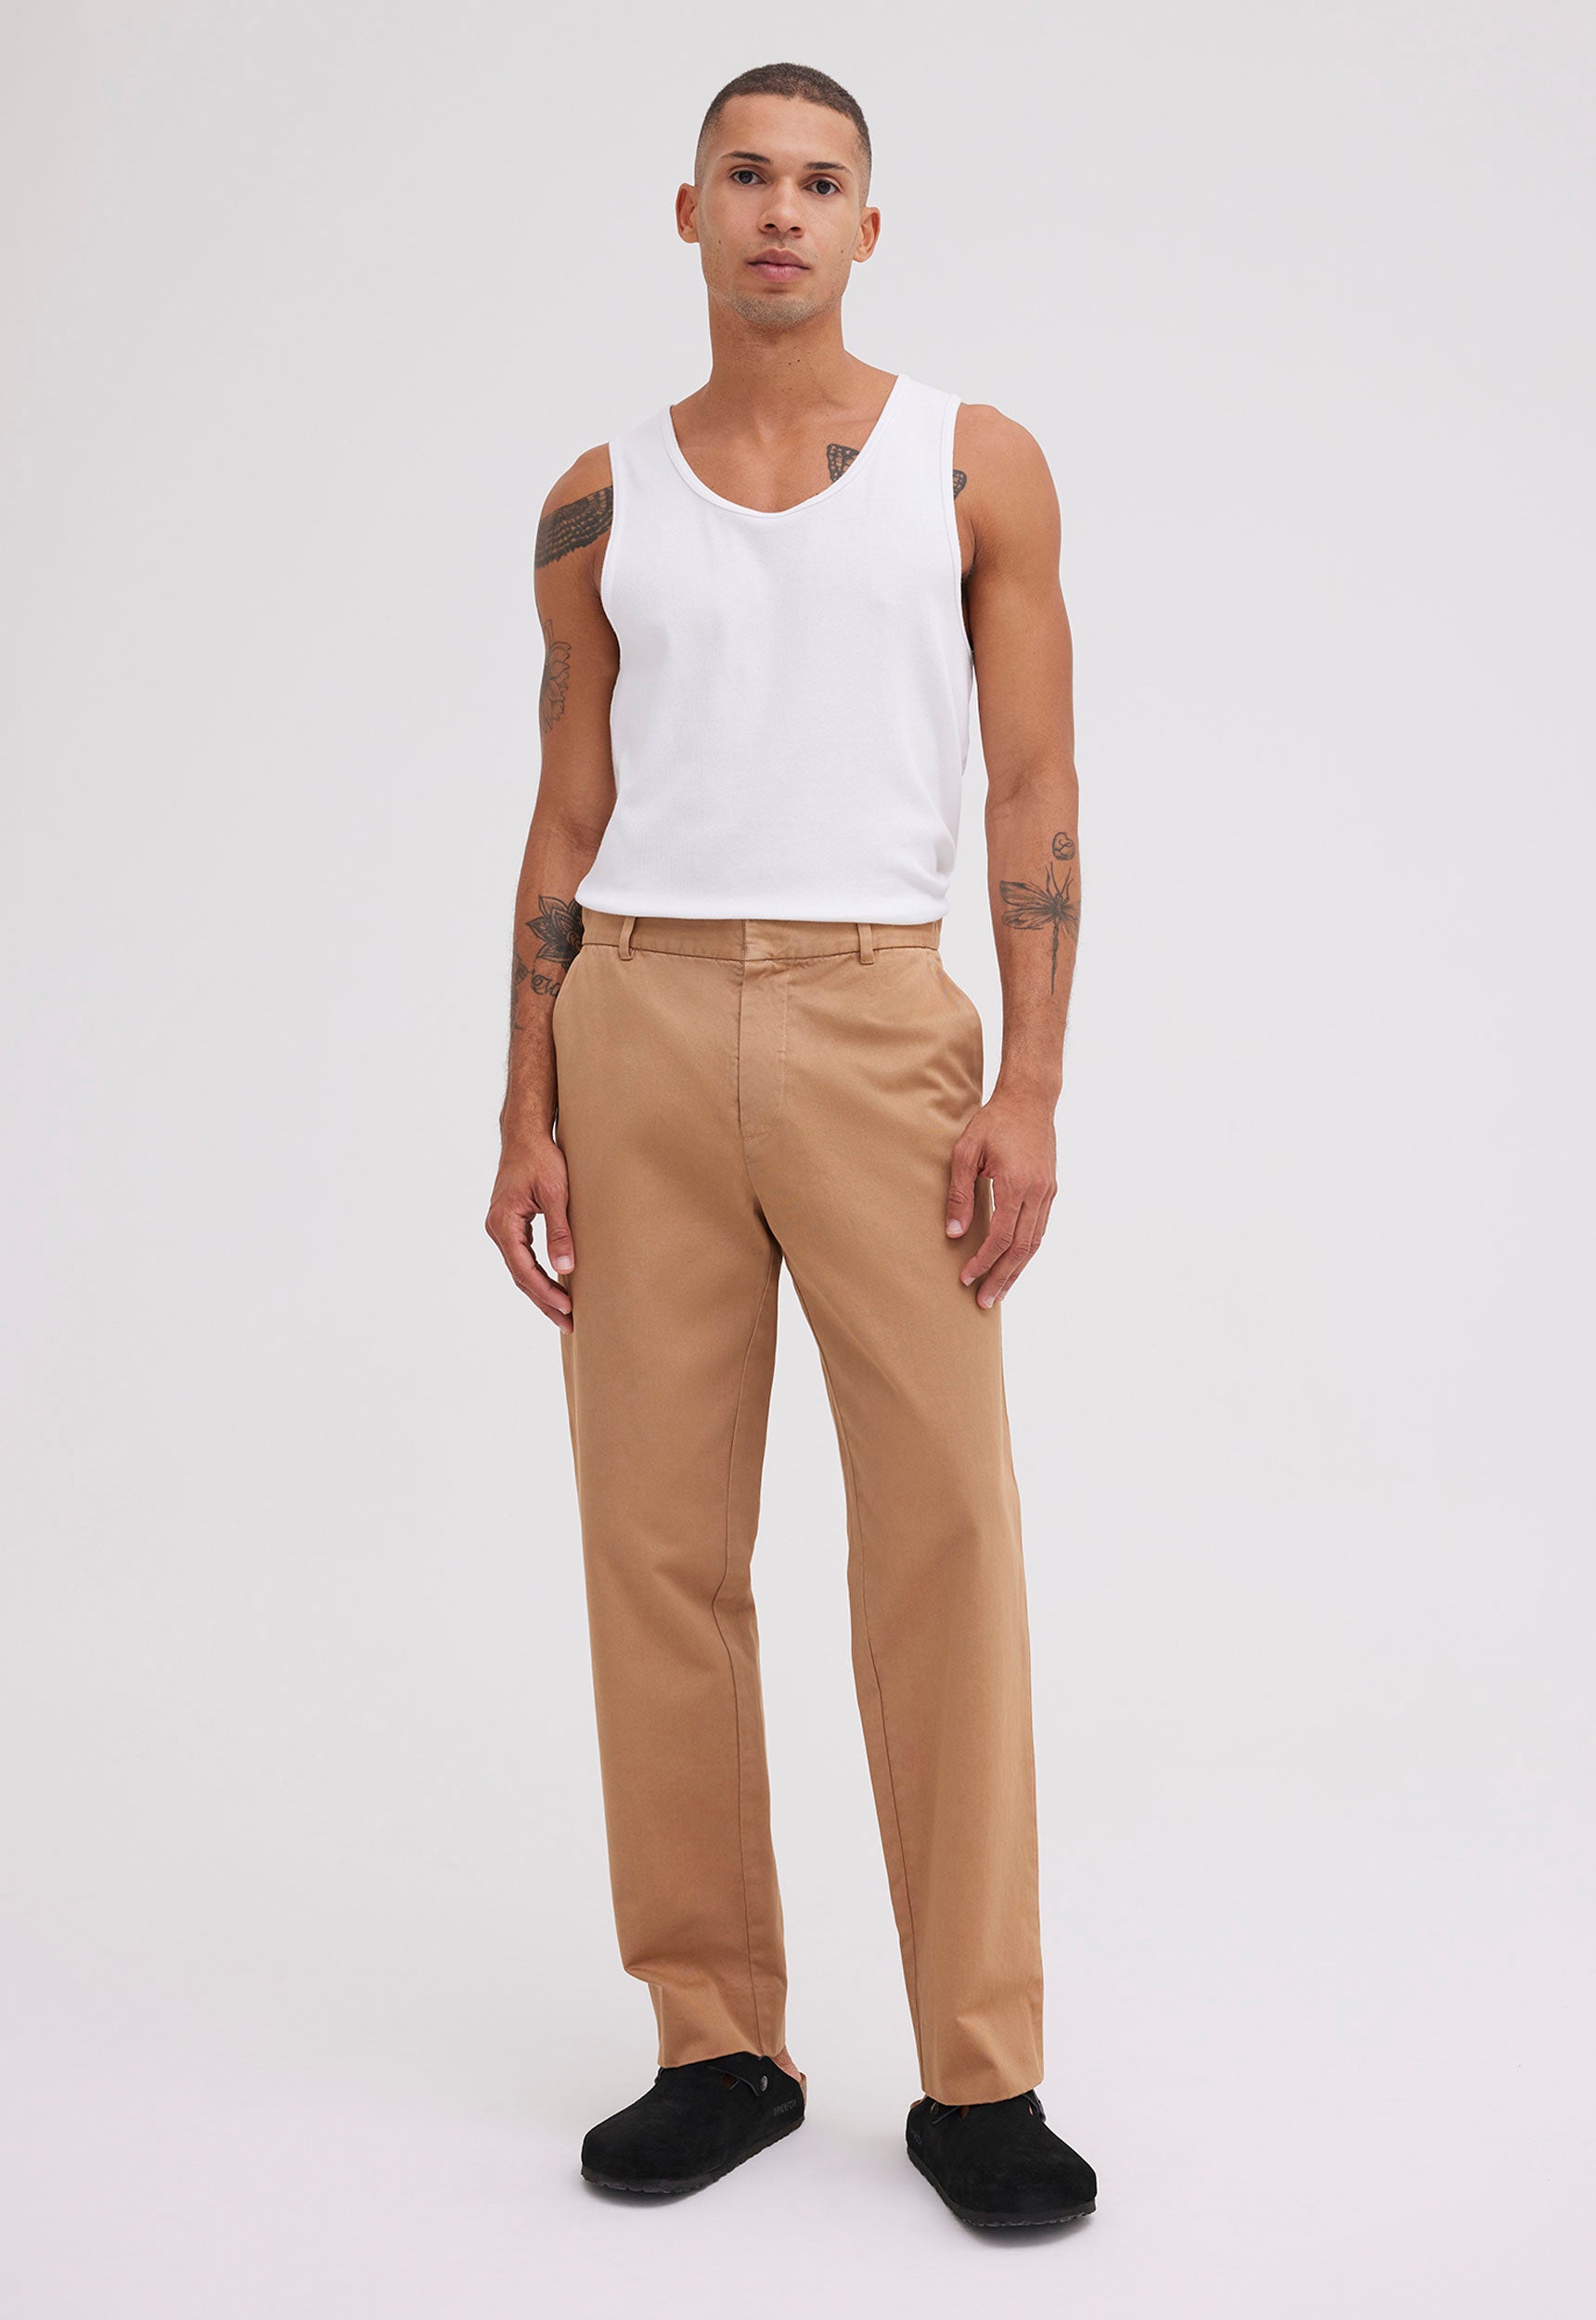 Cast Cotton Twill Pant in Nutmeg